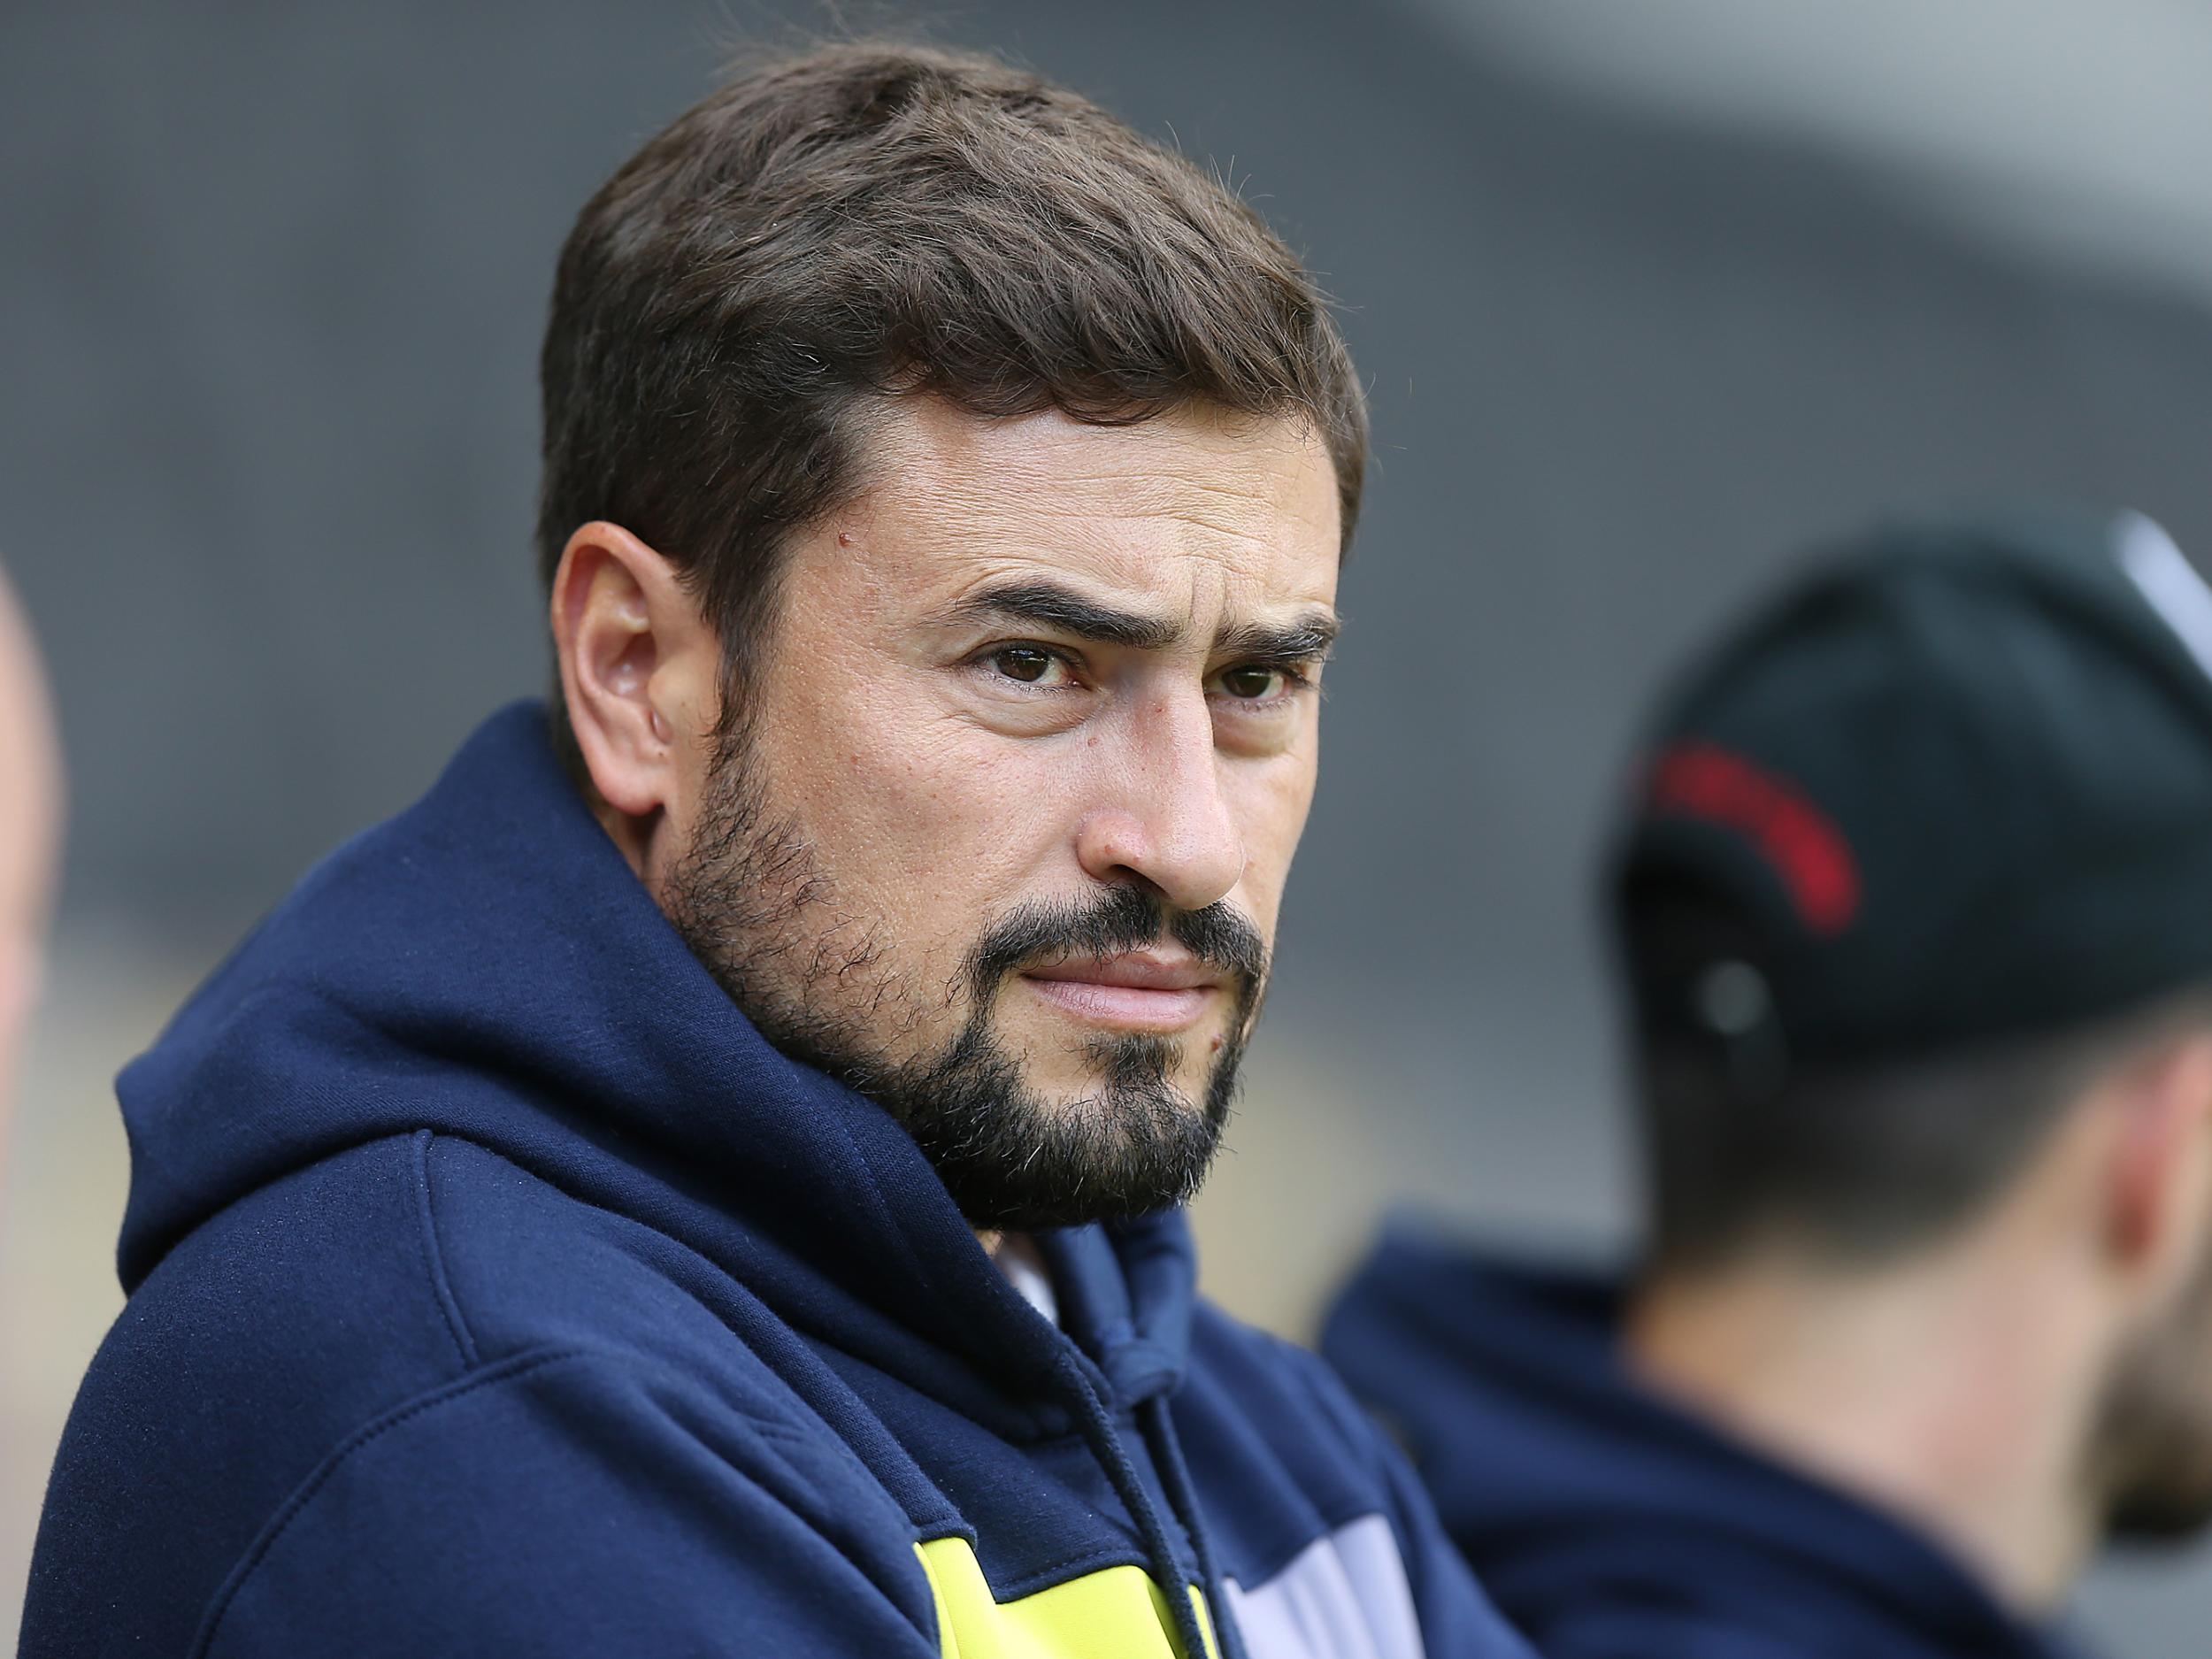 Managers are 'the weakest link' for clubs says Pep Clotet as former Oxford boss prepares for new challenge